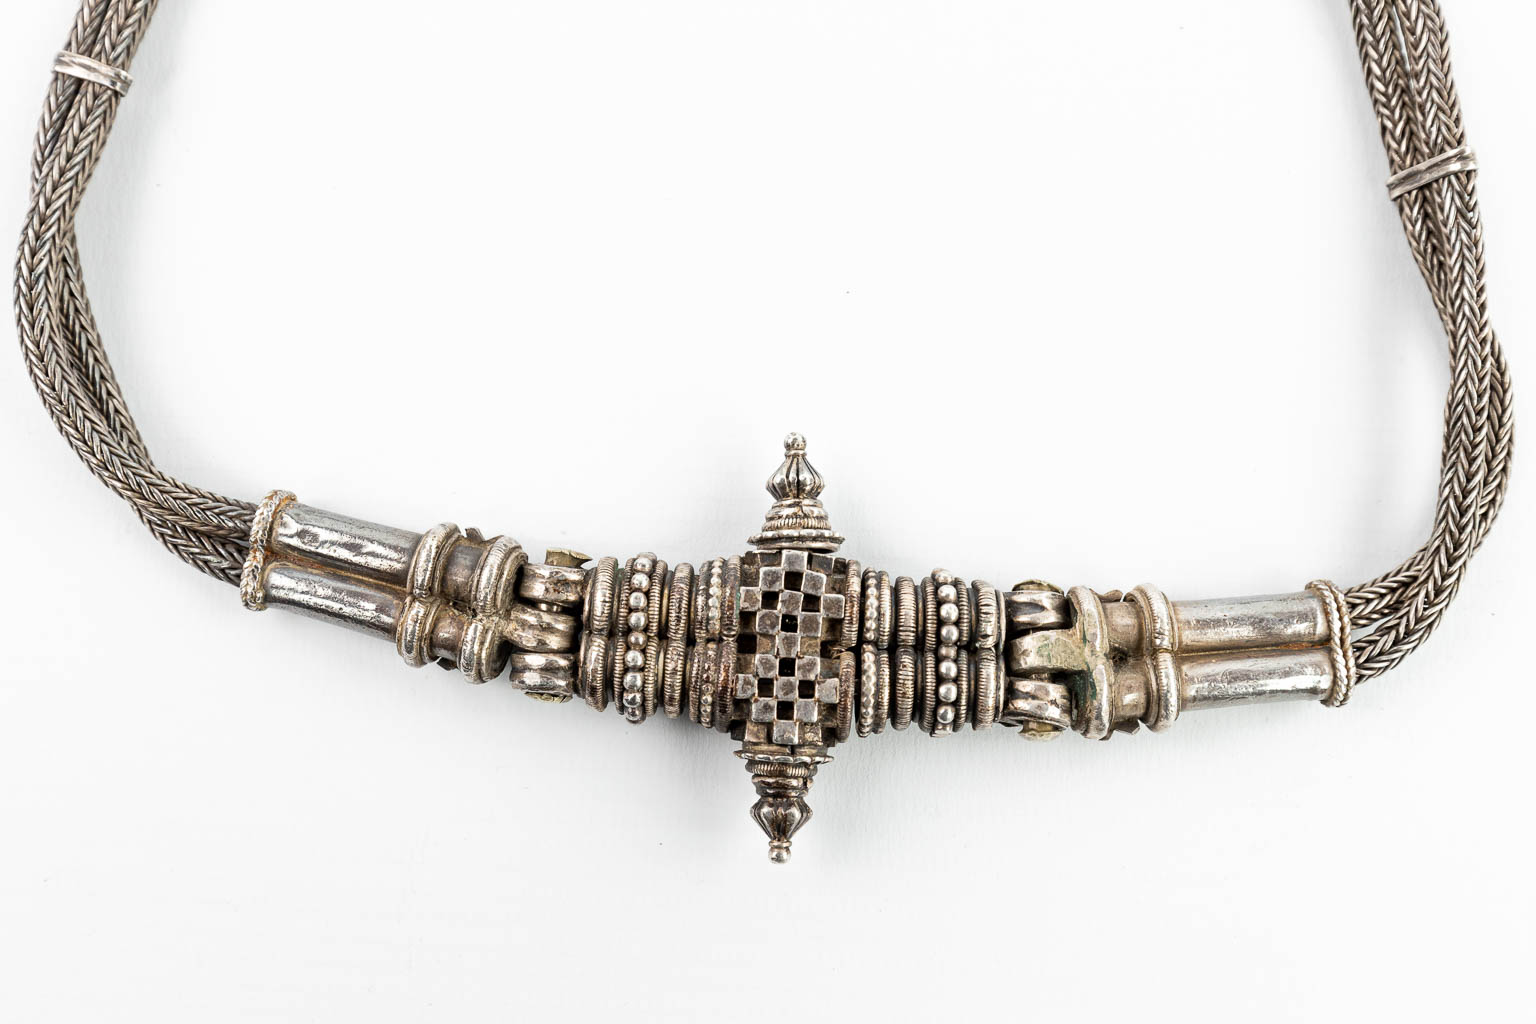 A necklace and belt made of silver in Oriental style. 